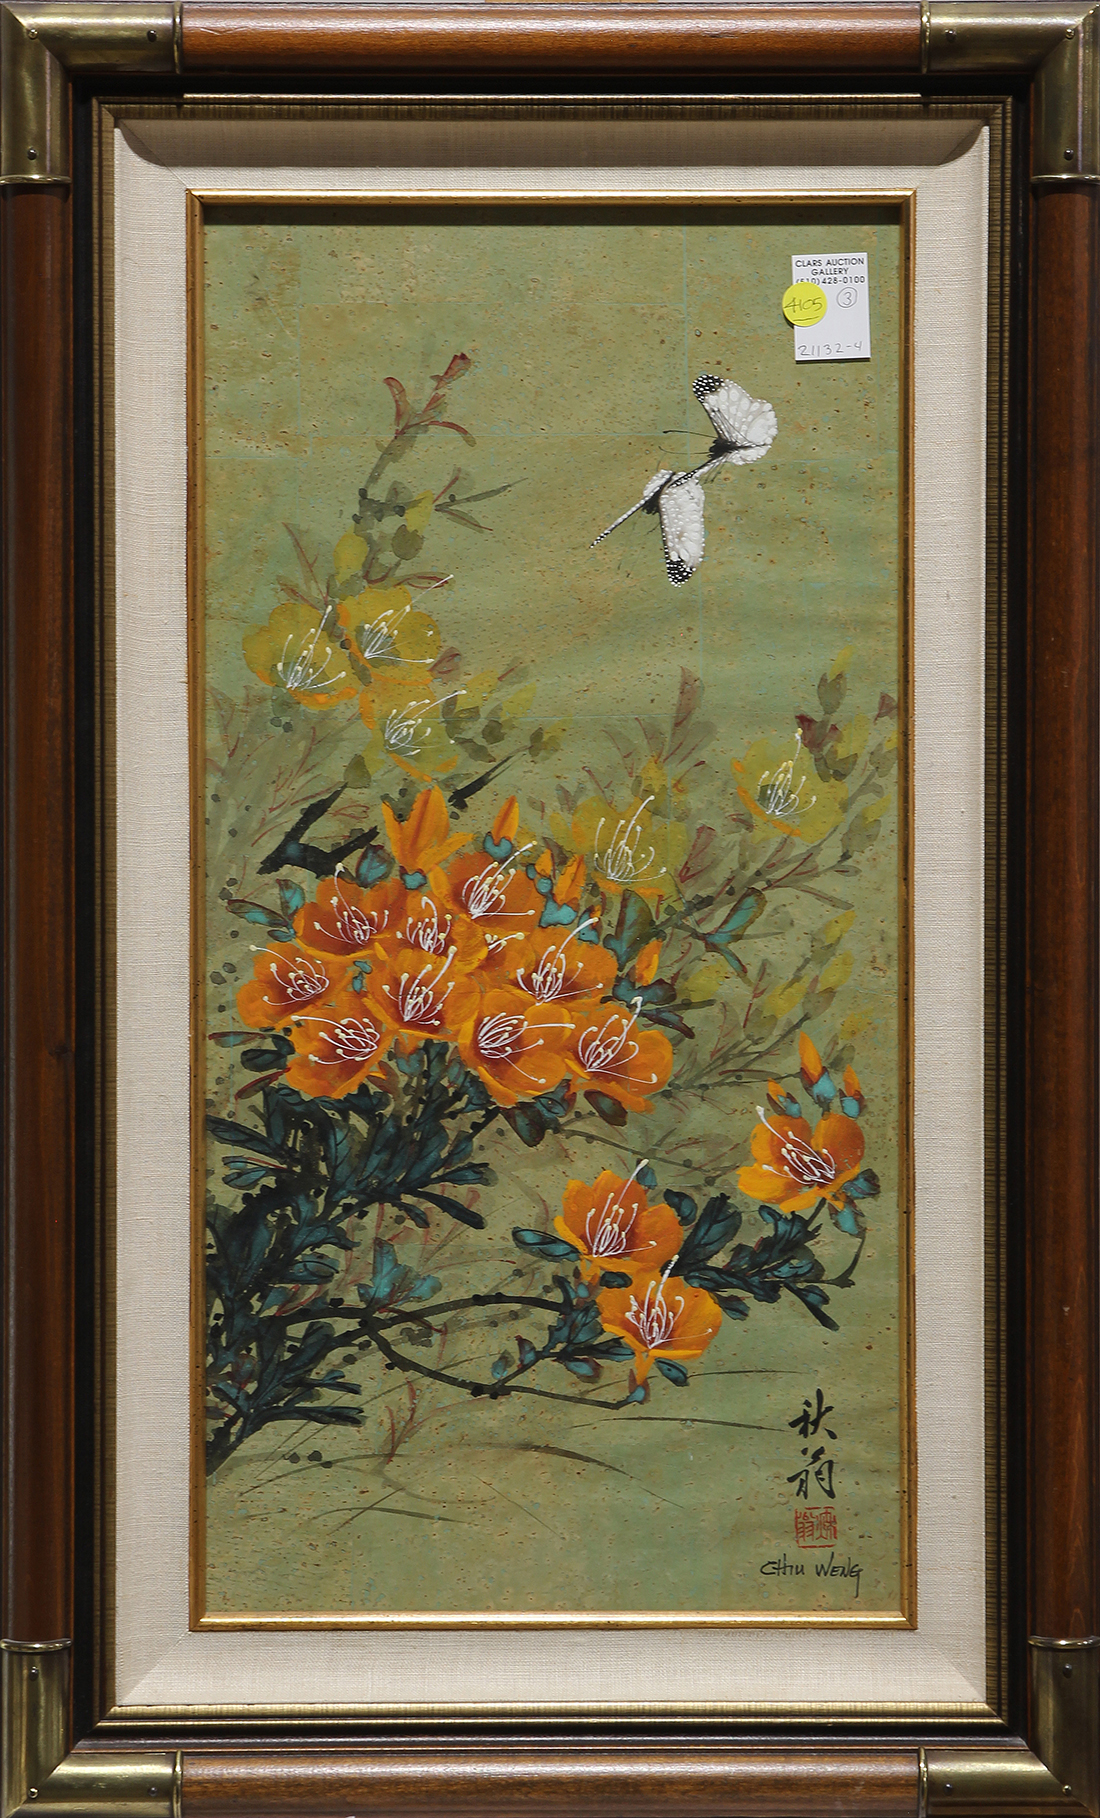 (lot of 3) Chiu Weng (Chinese, 20th century), Birds and Flowers, ink and color on paper, each signed - Image 2 of 5